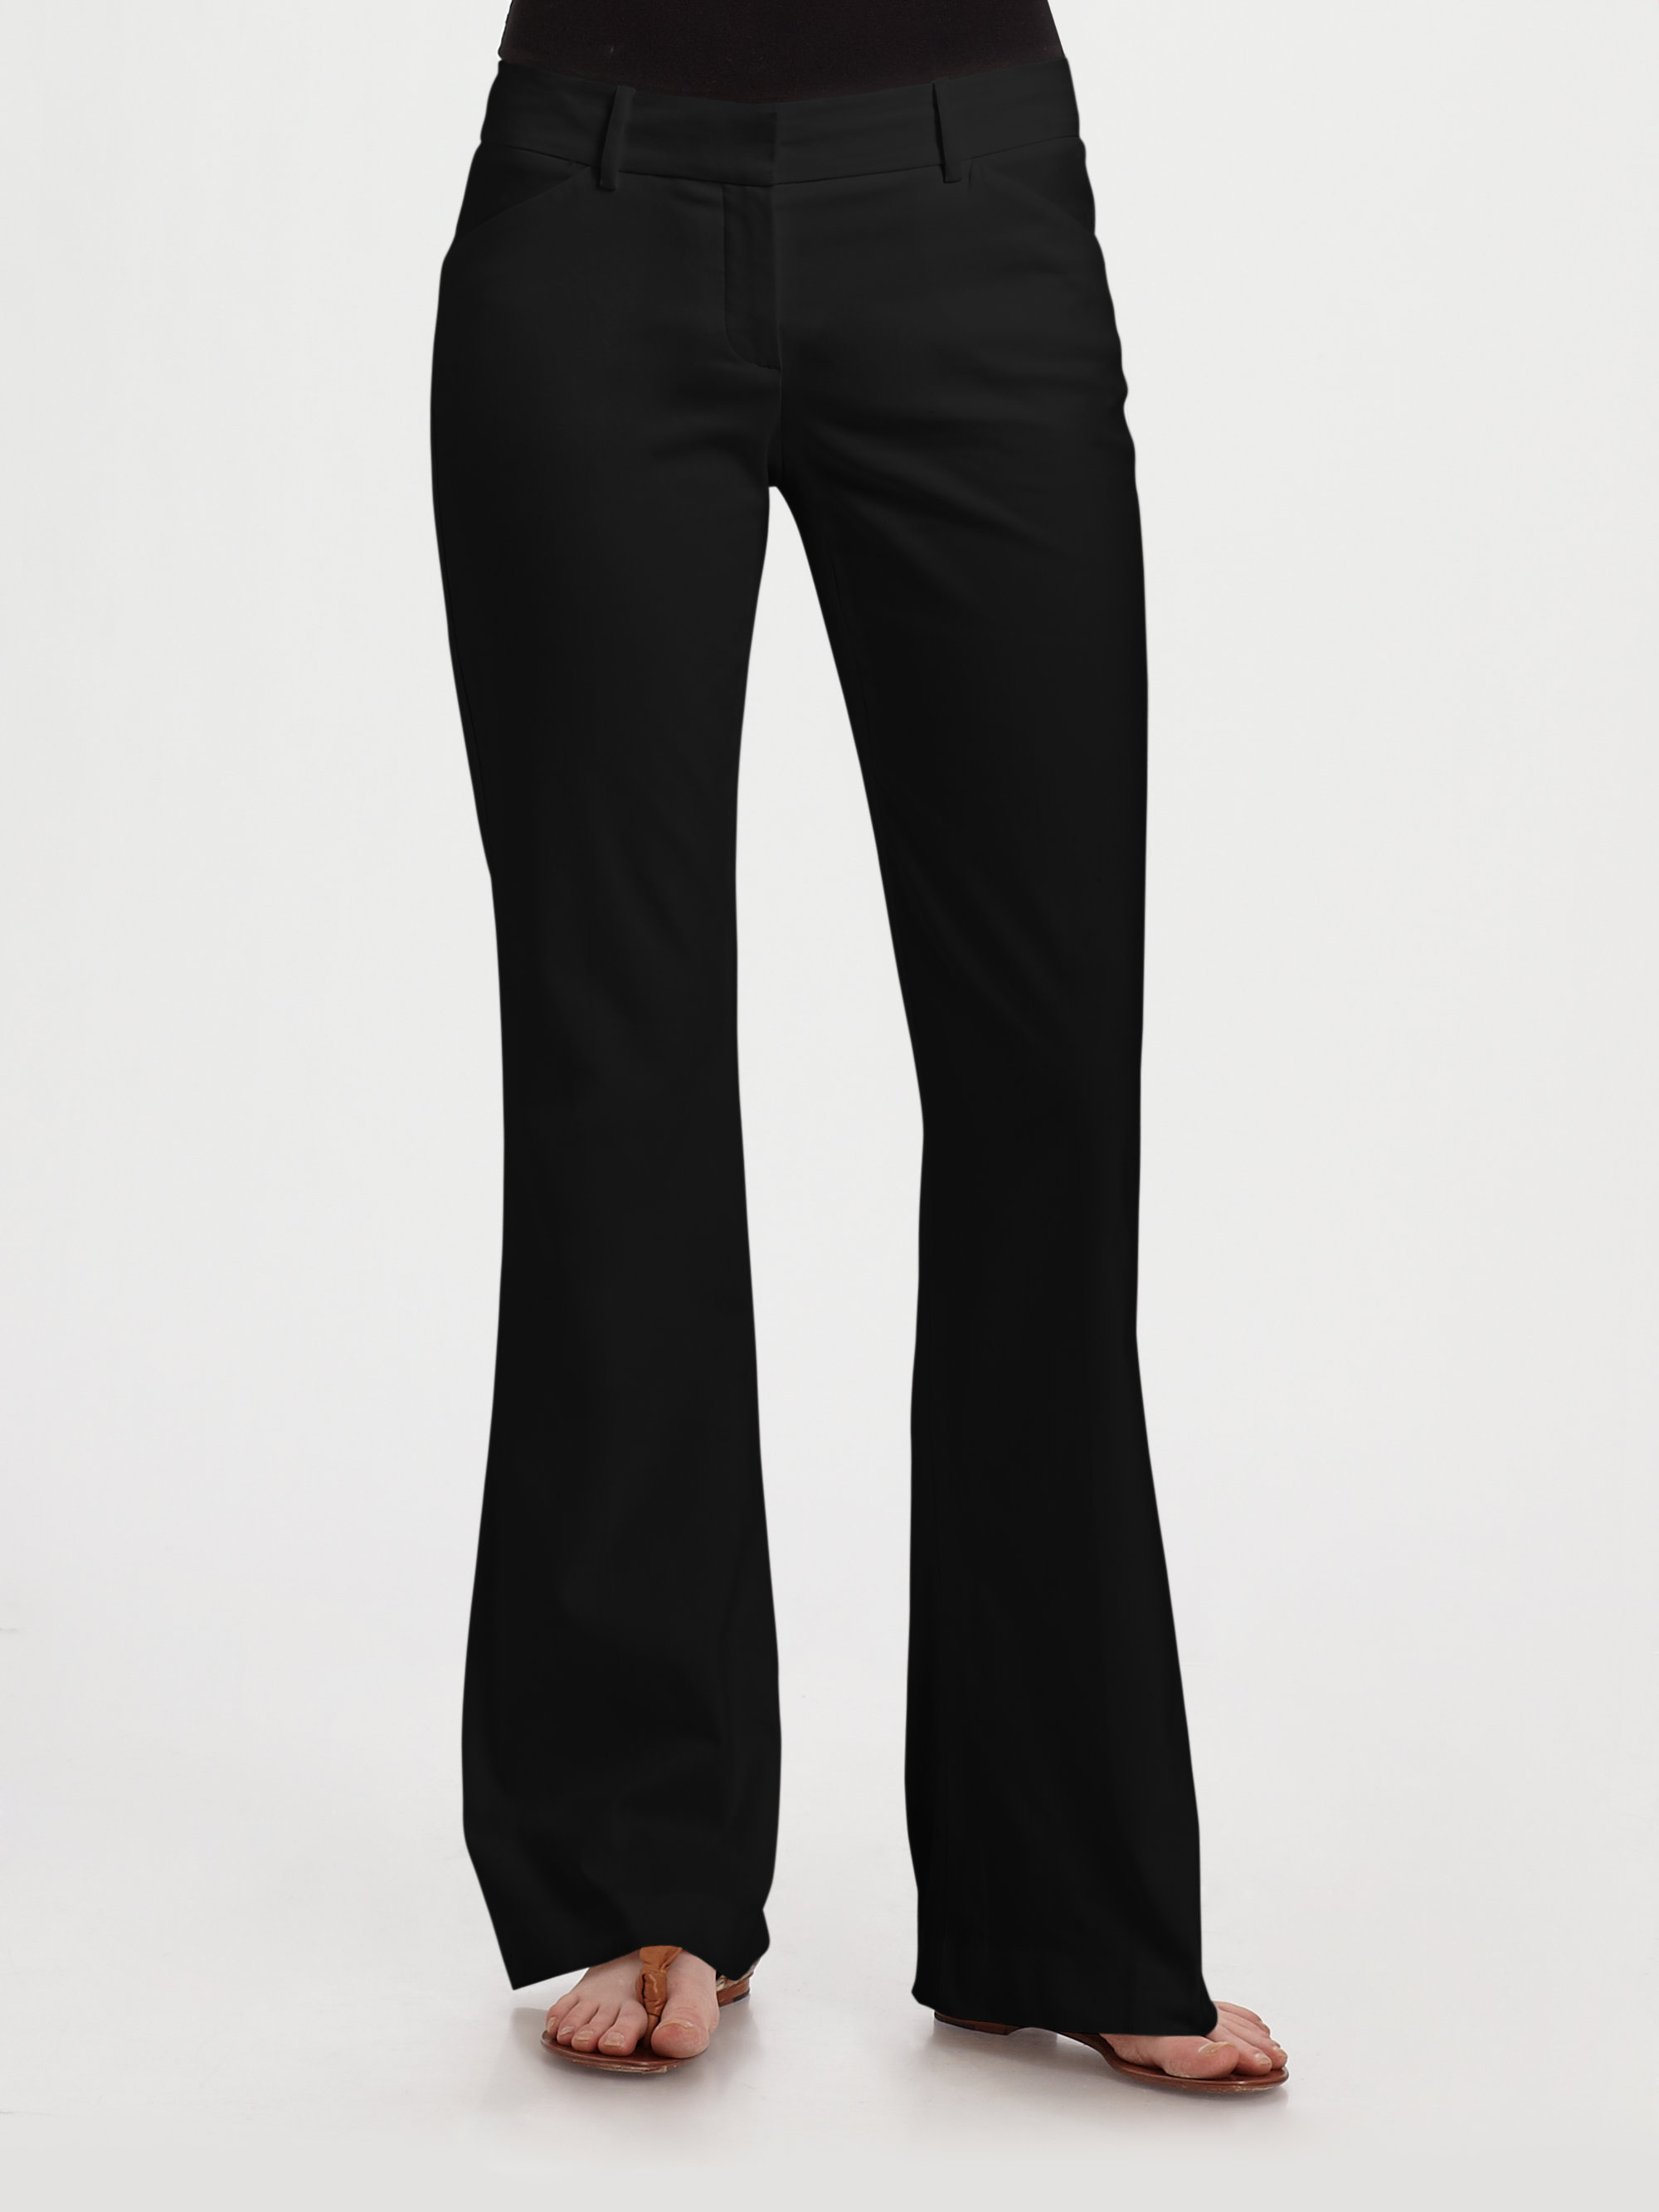 Theory Stretch Canvas Fit and Flare Pants in Black | Lyst